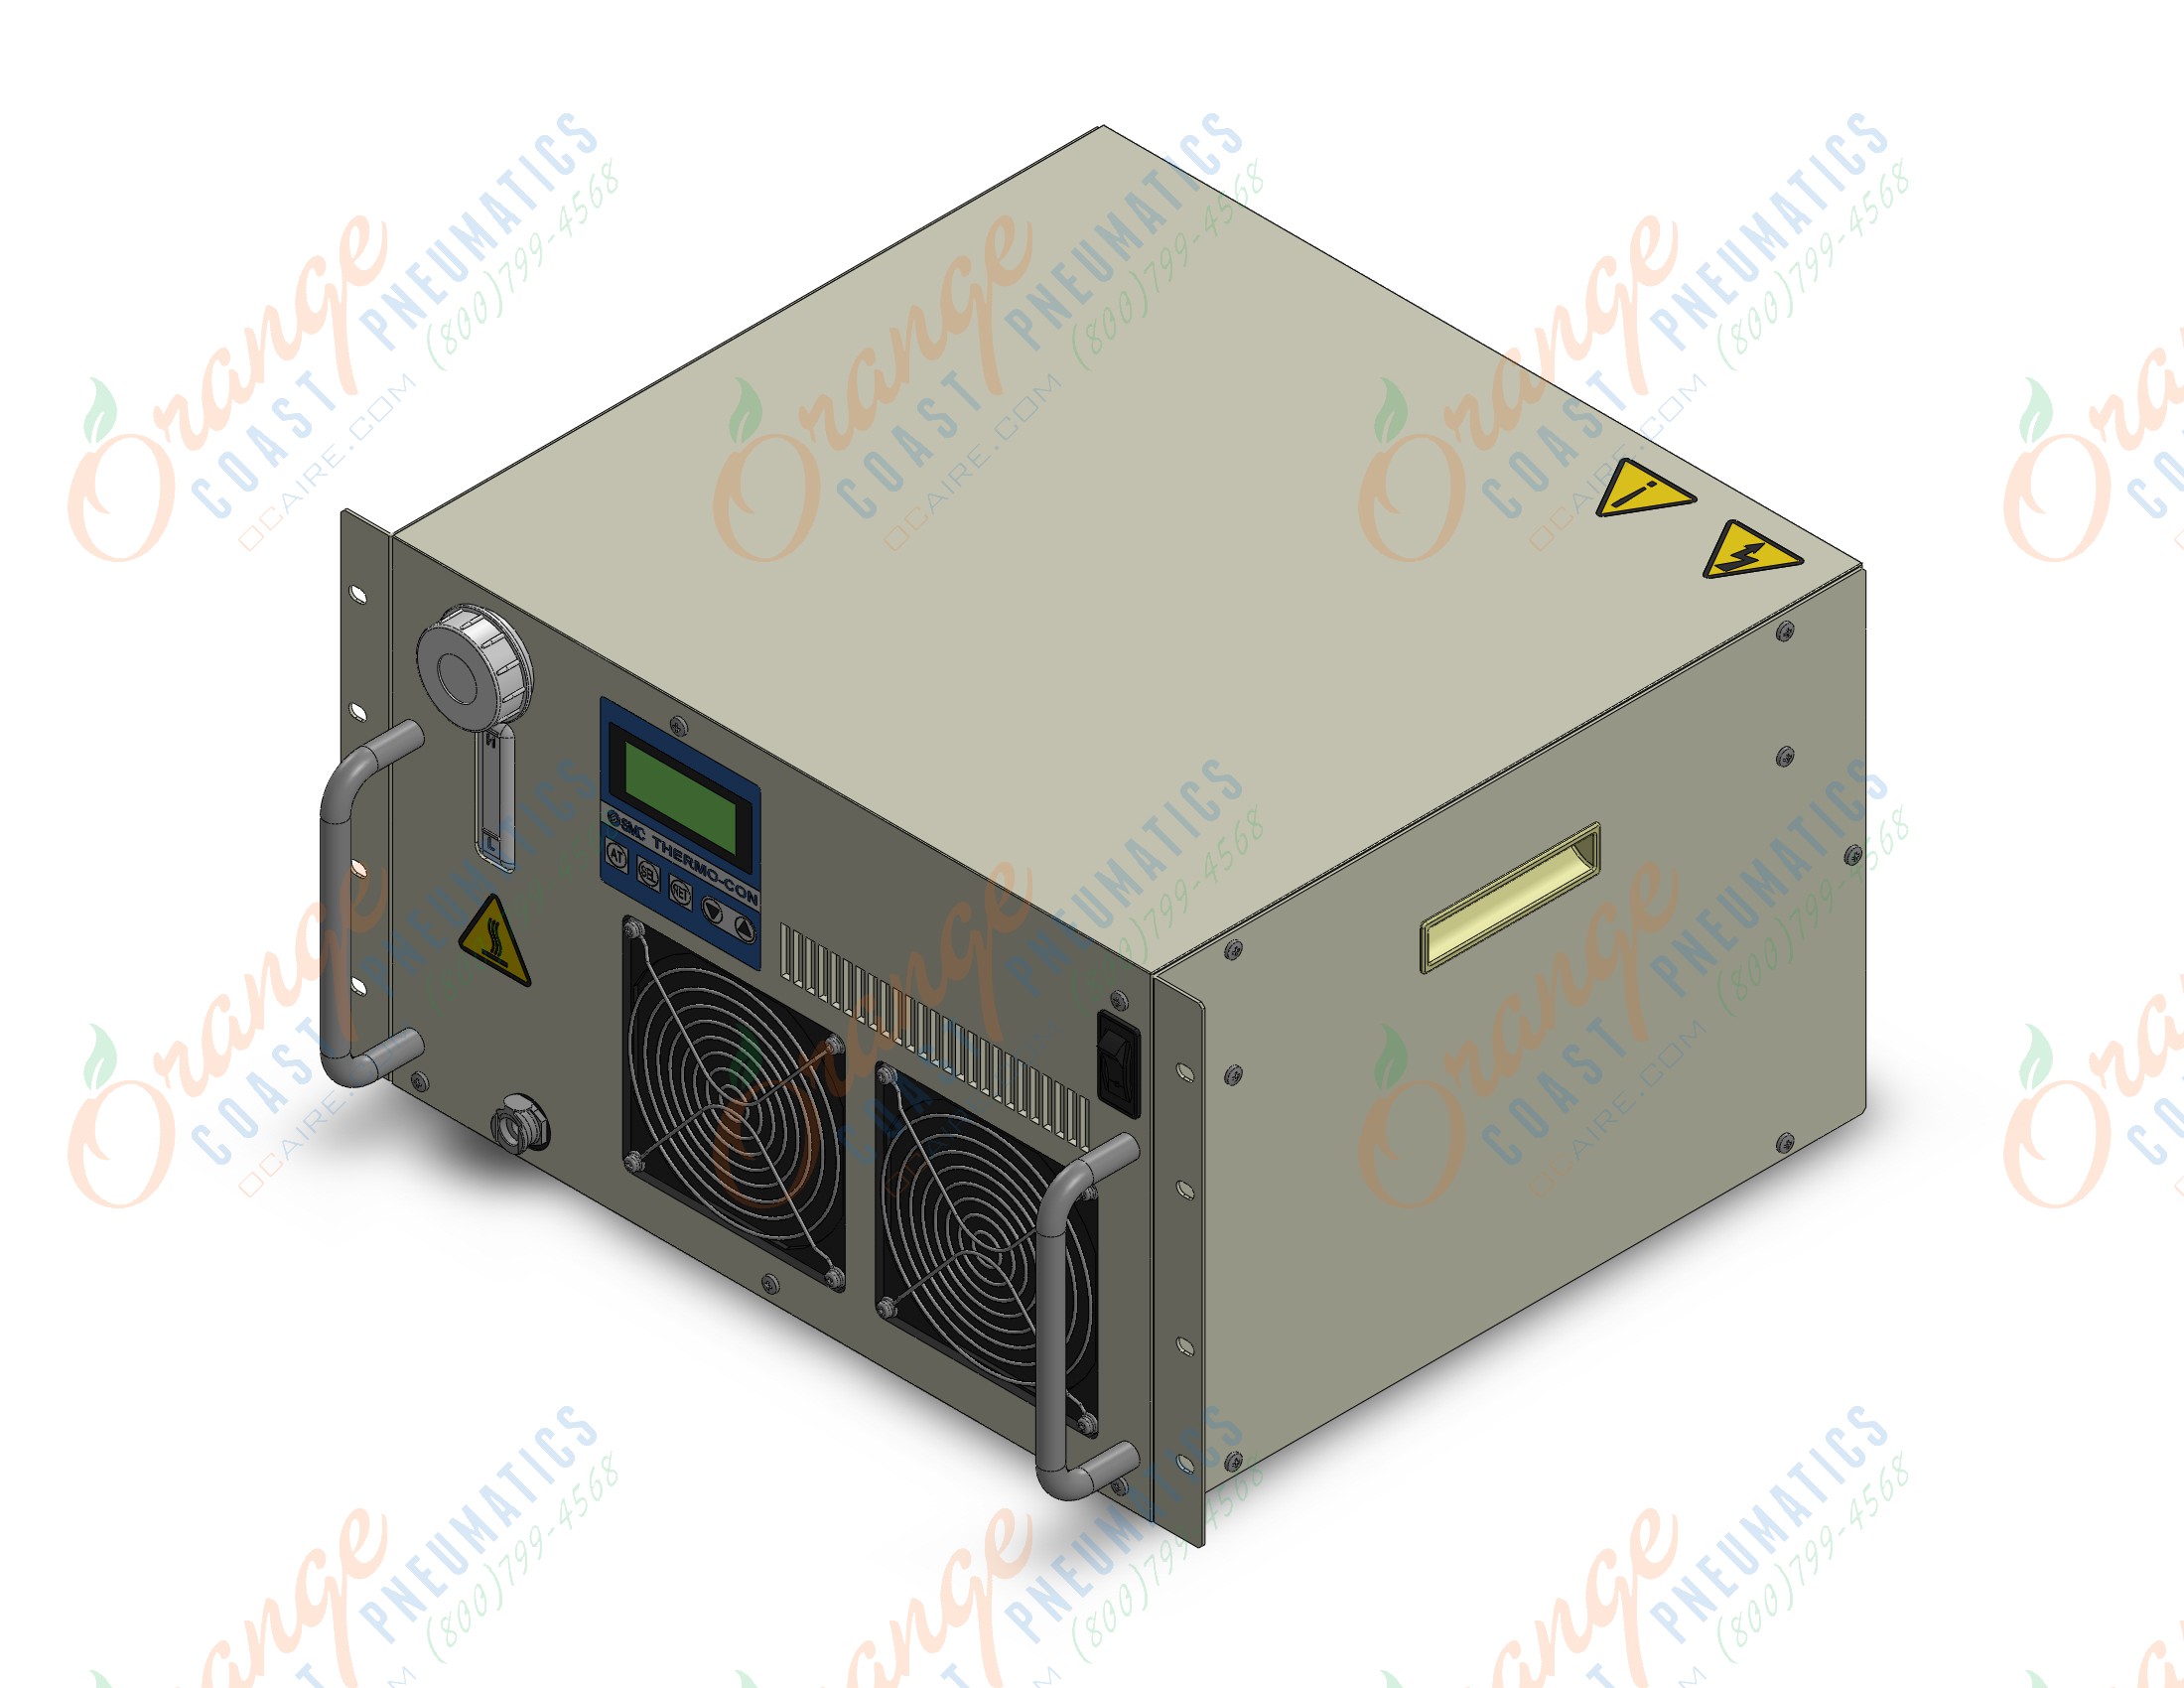 SMC HECR010-A2-P thermo con, rack mount, HRG - INDUSTRIAL CHILLER